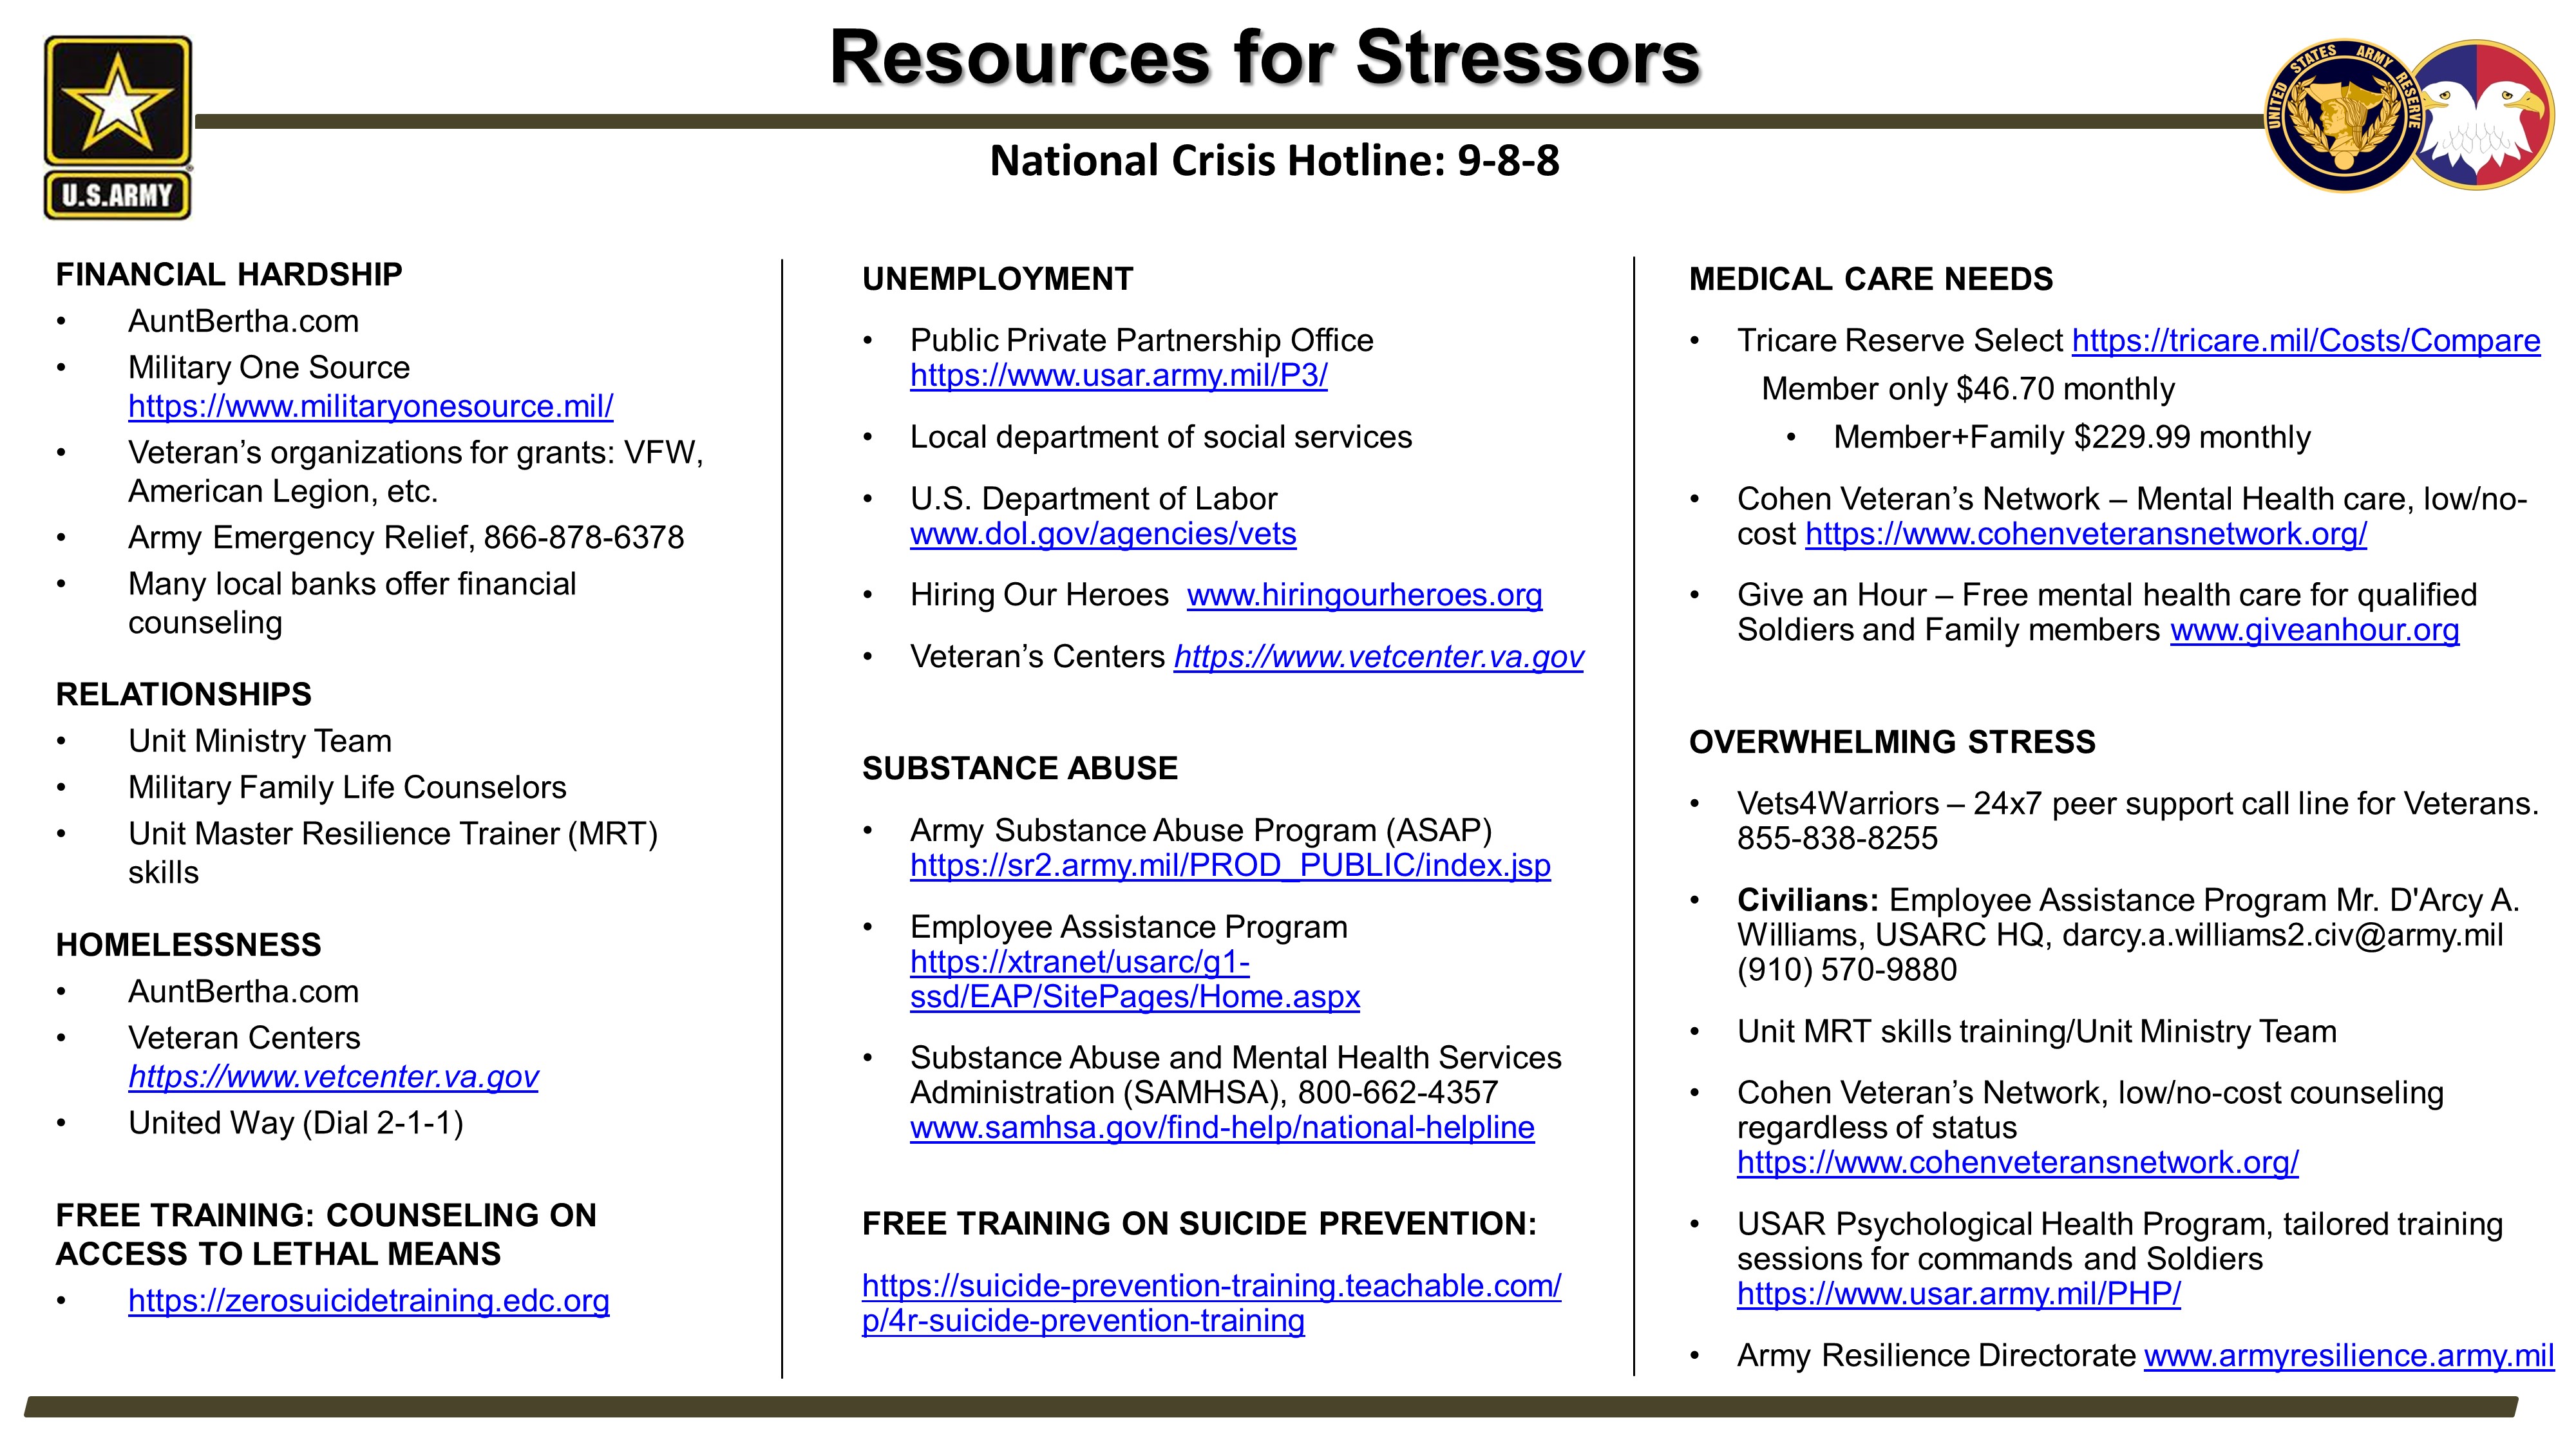 Resources for Stressors - link to PDF